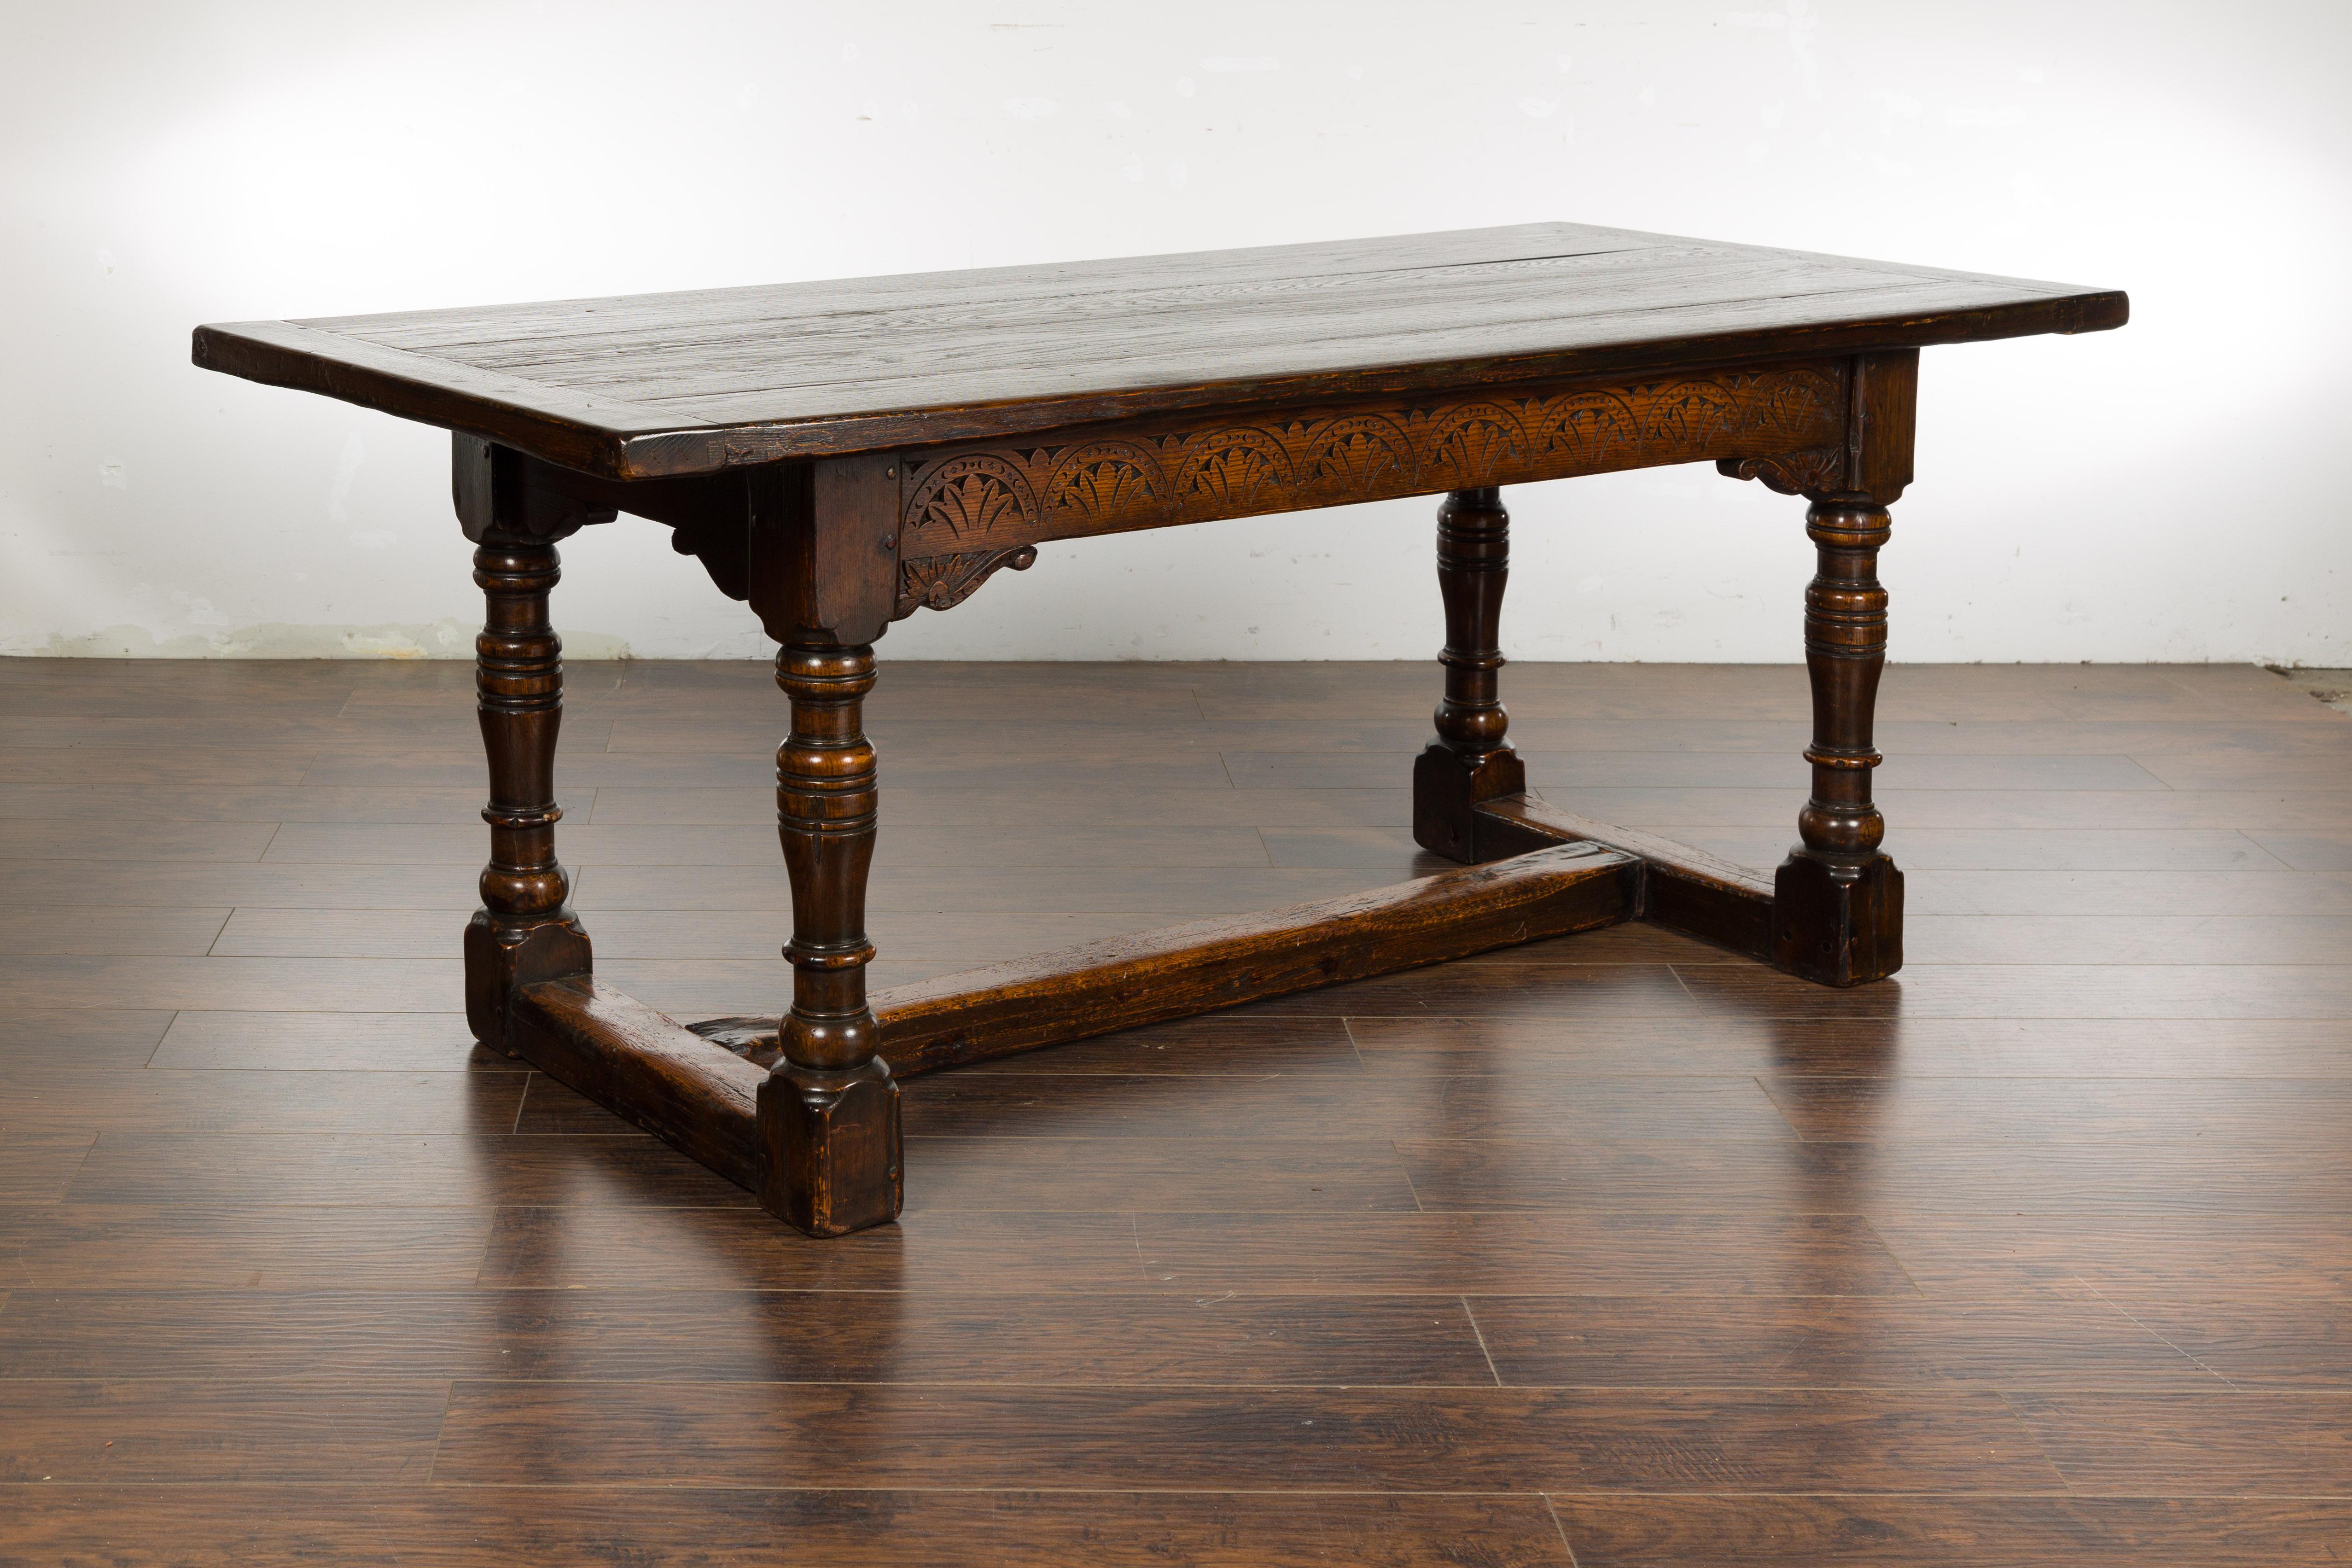 19th Century English Oak Table with Carved Apron and Turned Legs For Sale 10